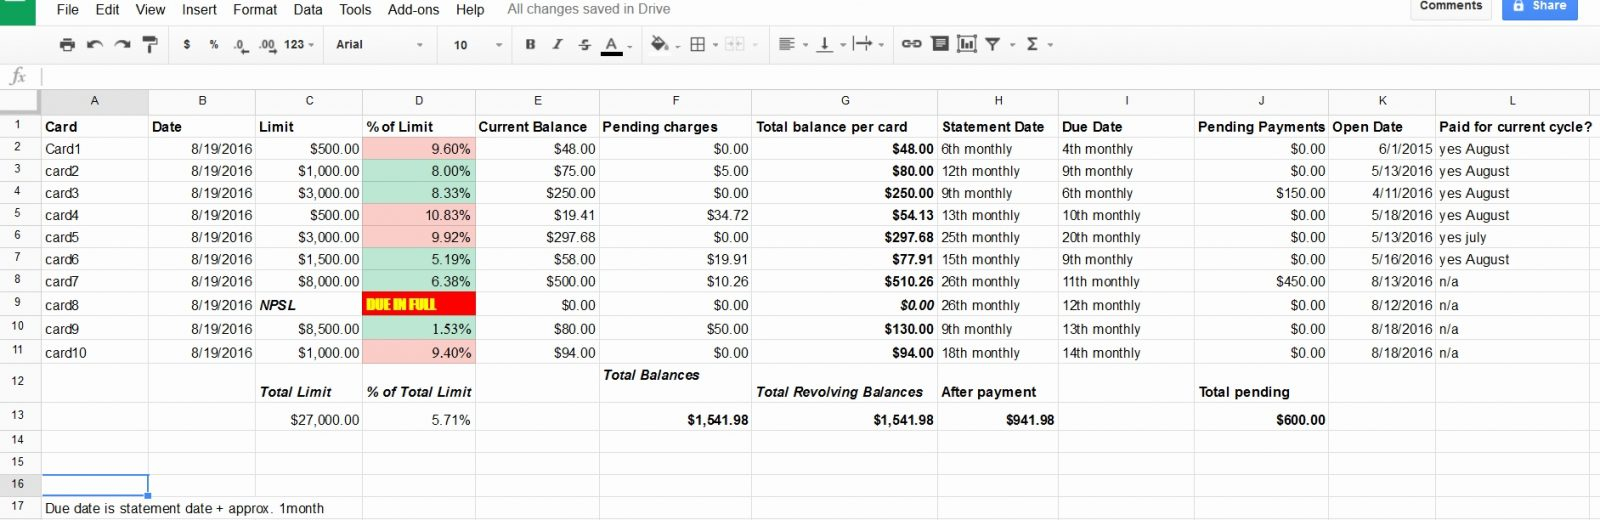 Flitch Beam Design Spreadsheet With Regard To Flitch Beam Design Spreadsheet Examples Credit Cardment Tracking